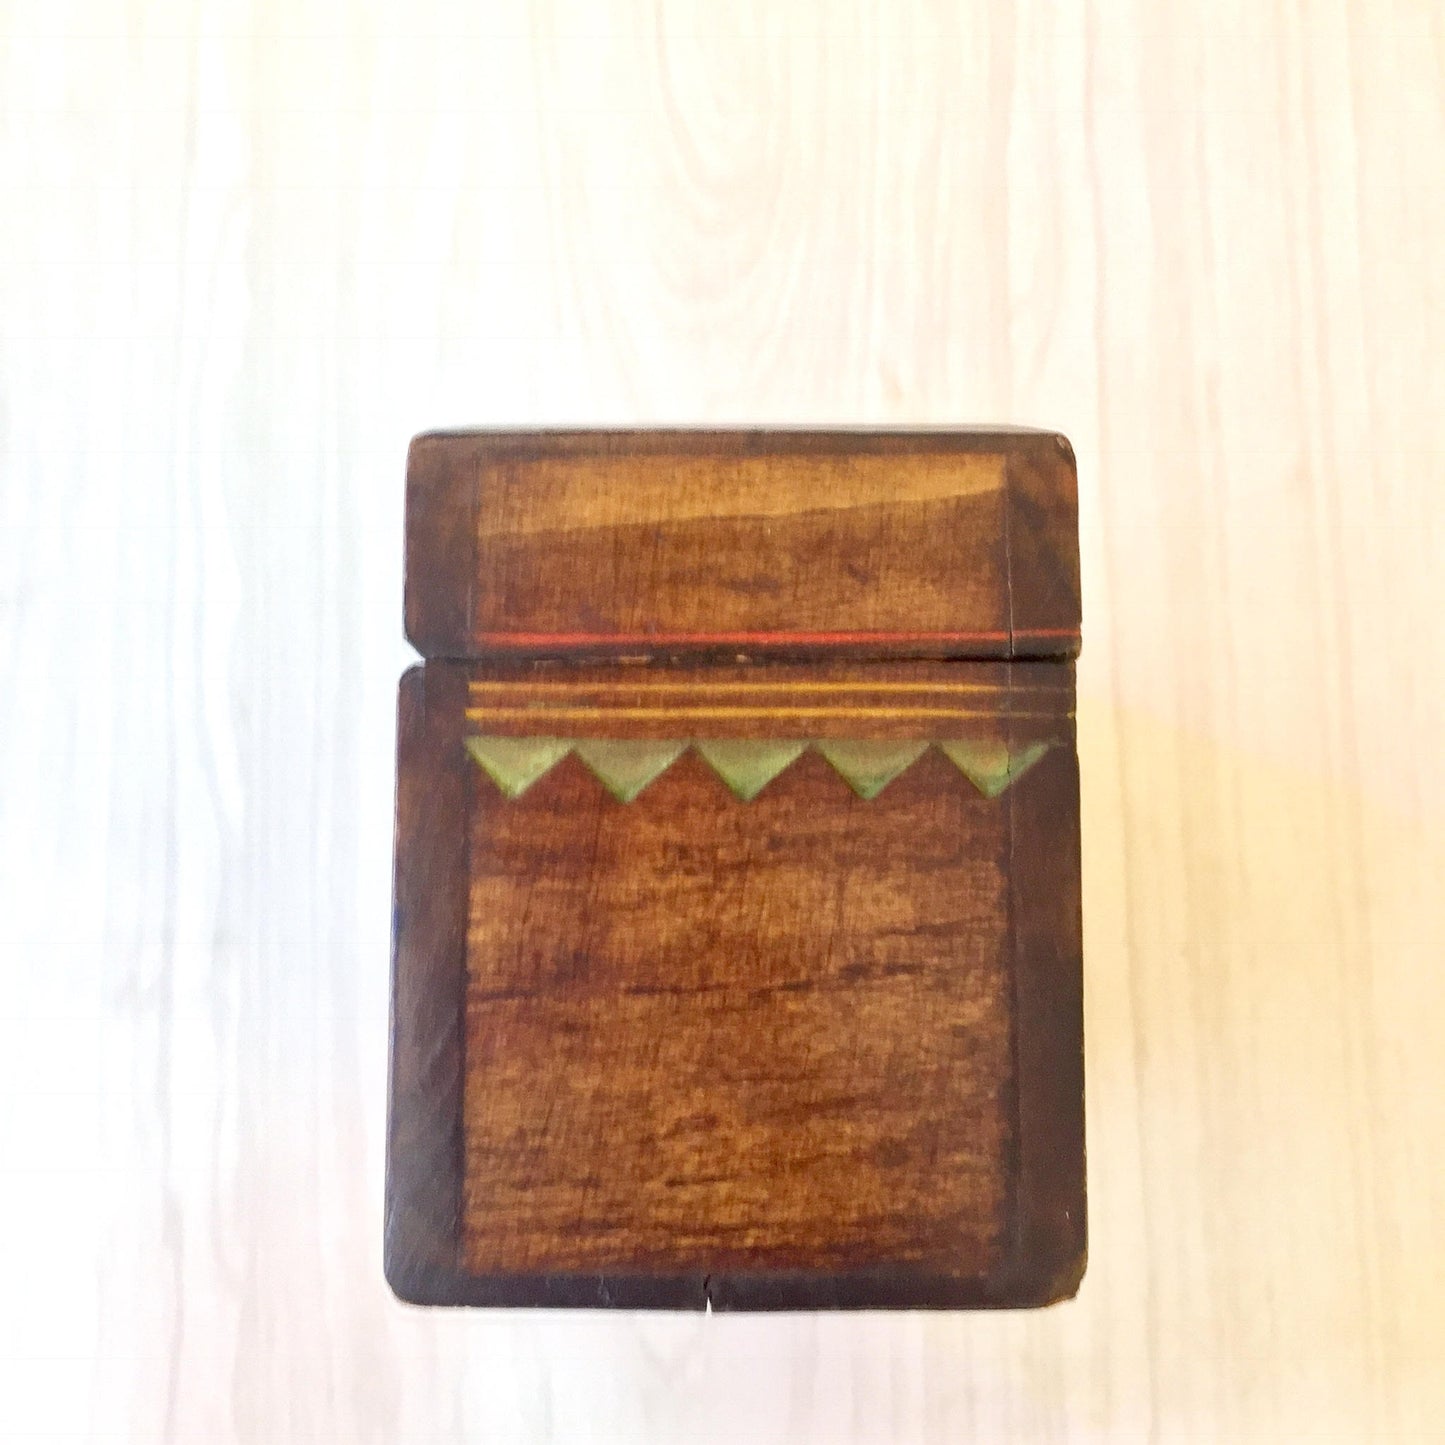 Zakopane hand carved wooden box with geometric pattern and decorative border, perfect for storing recipes, trinkets or business cards. Rustic brown wood finish.